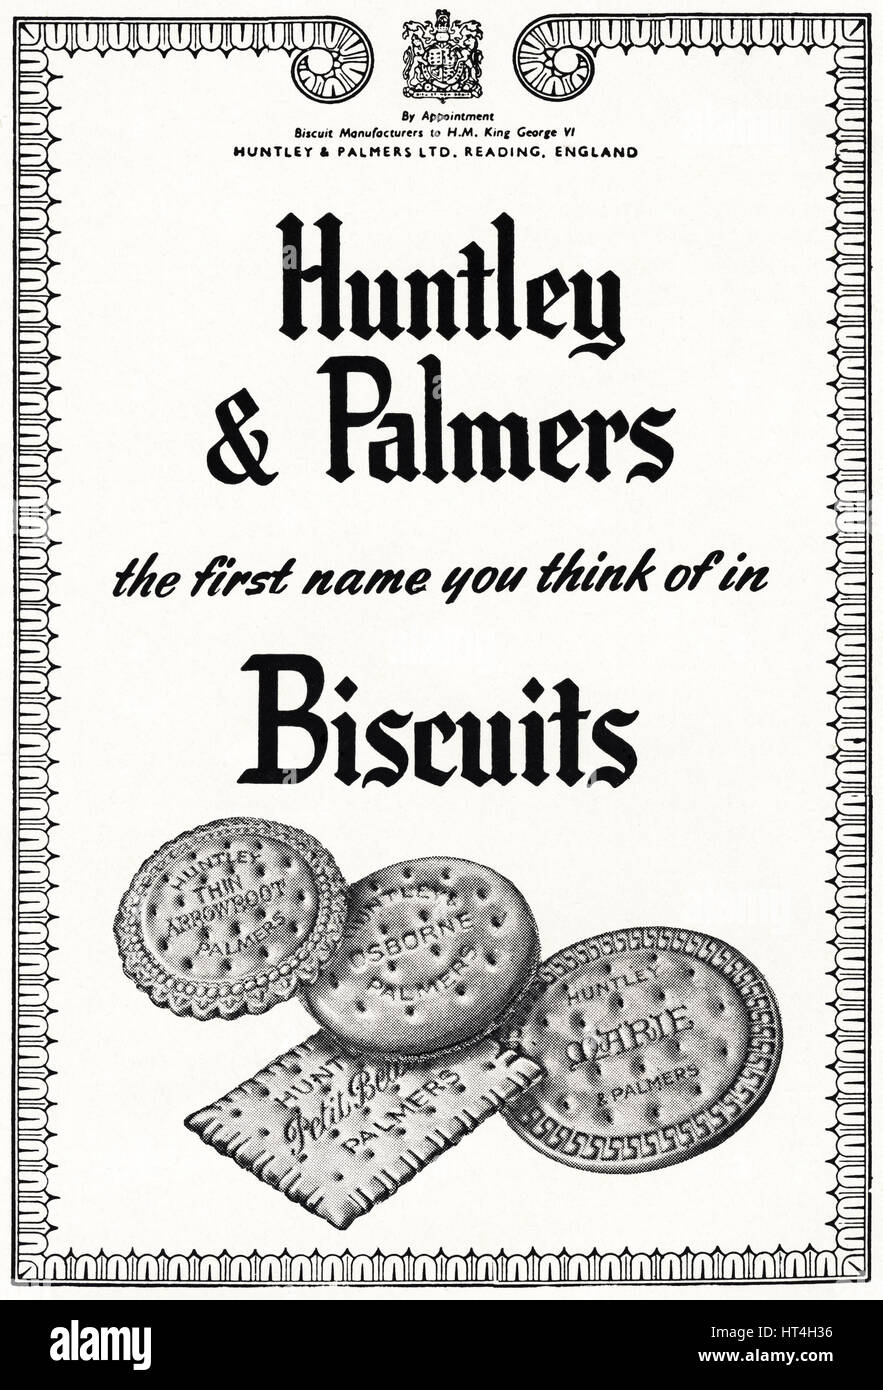 1950s advertising advert from original old vintage English magazine dated 1950 advertisement for Huntley & Palmers biscuits by Royal Appointment to King George VI Stock Photo